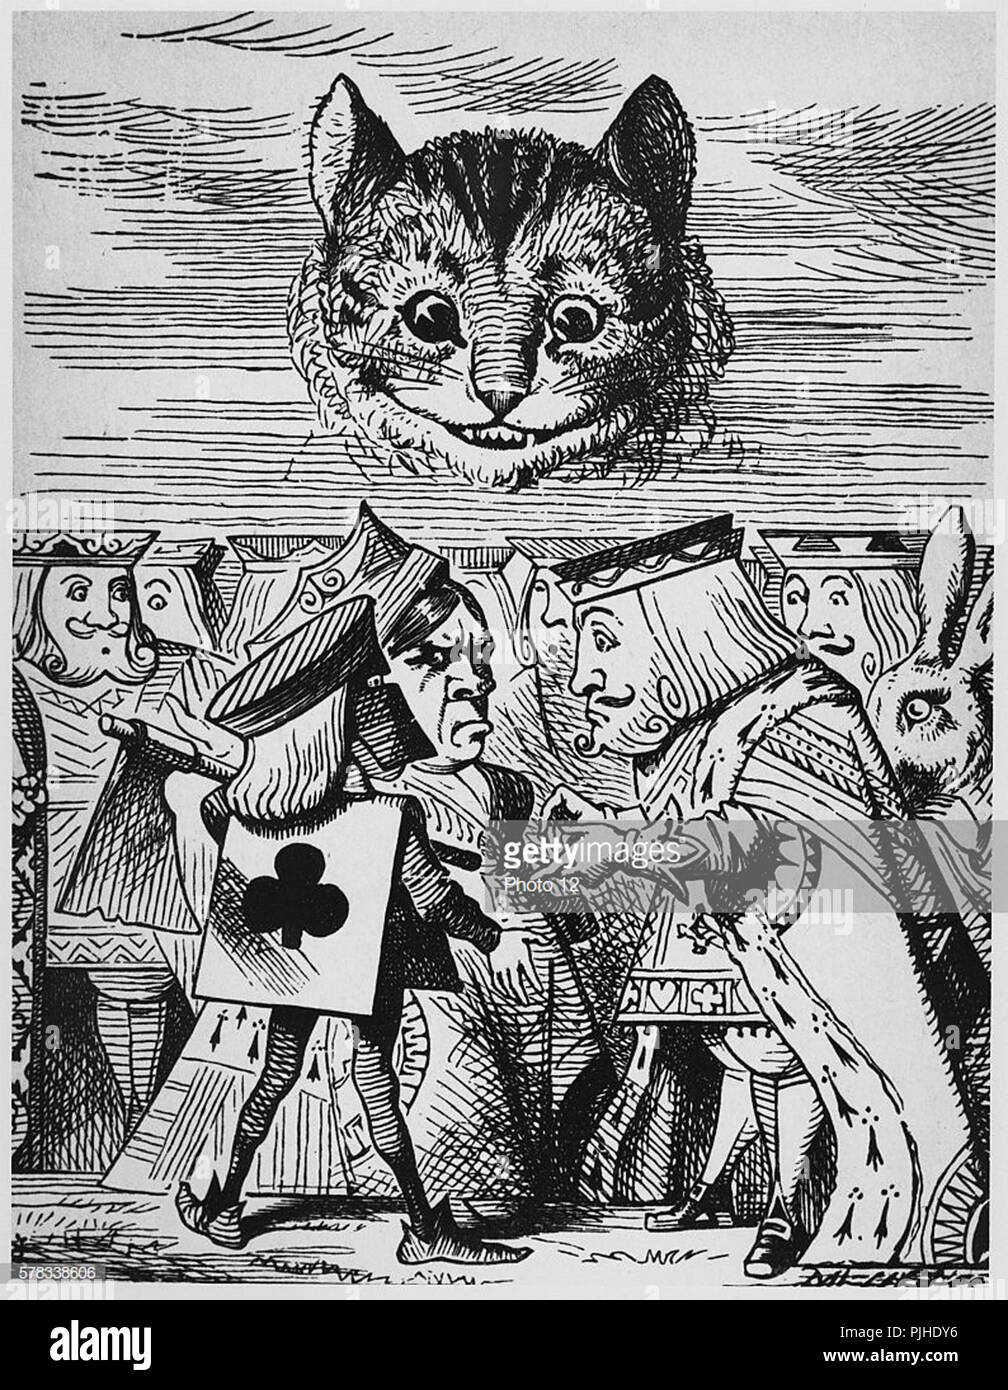 Illustration by Sir John Tenniel Alice in Wonderland, by Lewis Carroll London, MacMilllan, 1865. Executioner argues with King about cutting off Cheshi Stock Photo